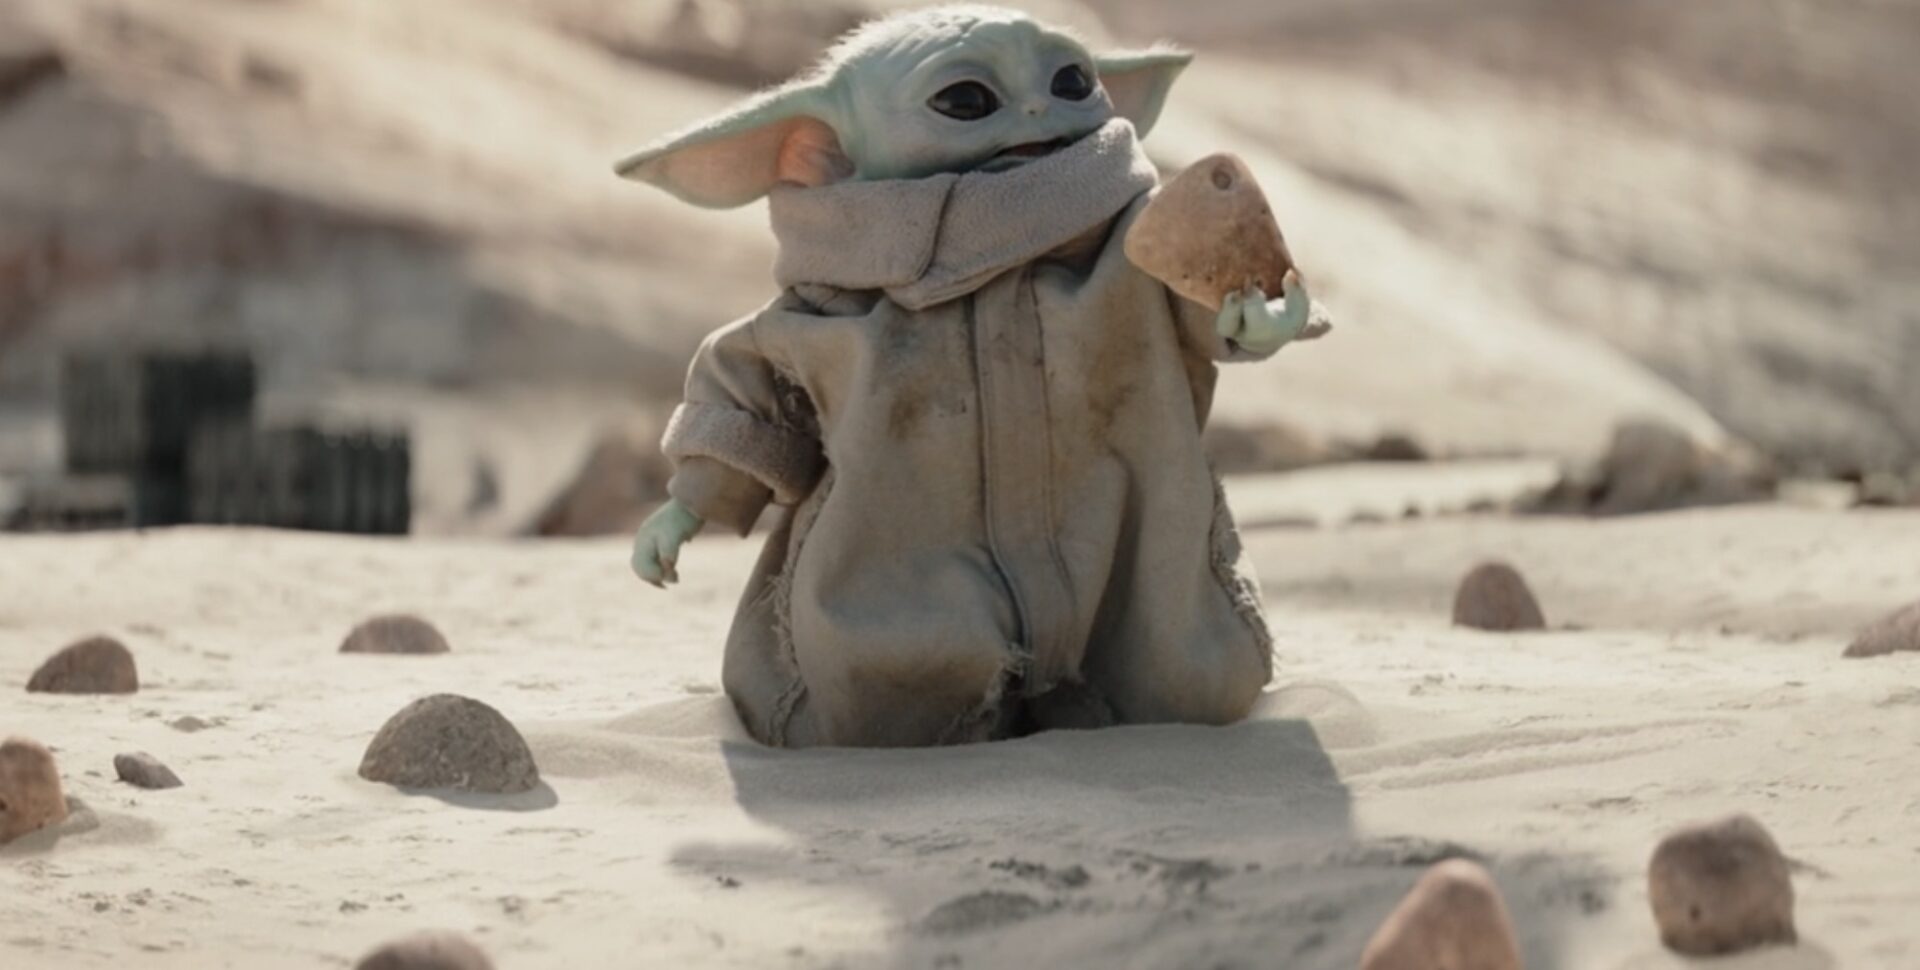 Disney announces The Mandalorian and Baby Yoda are coming to the